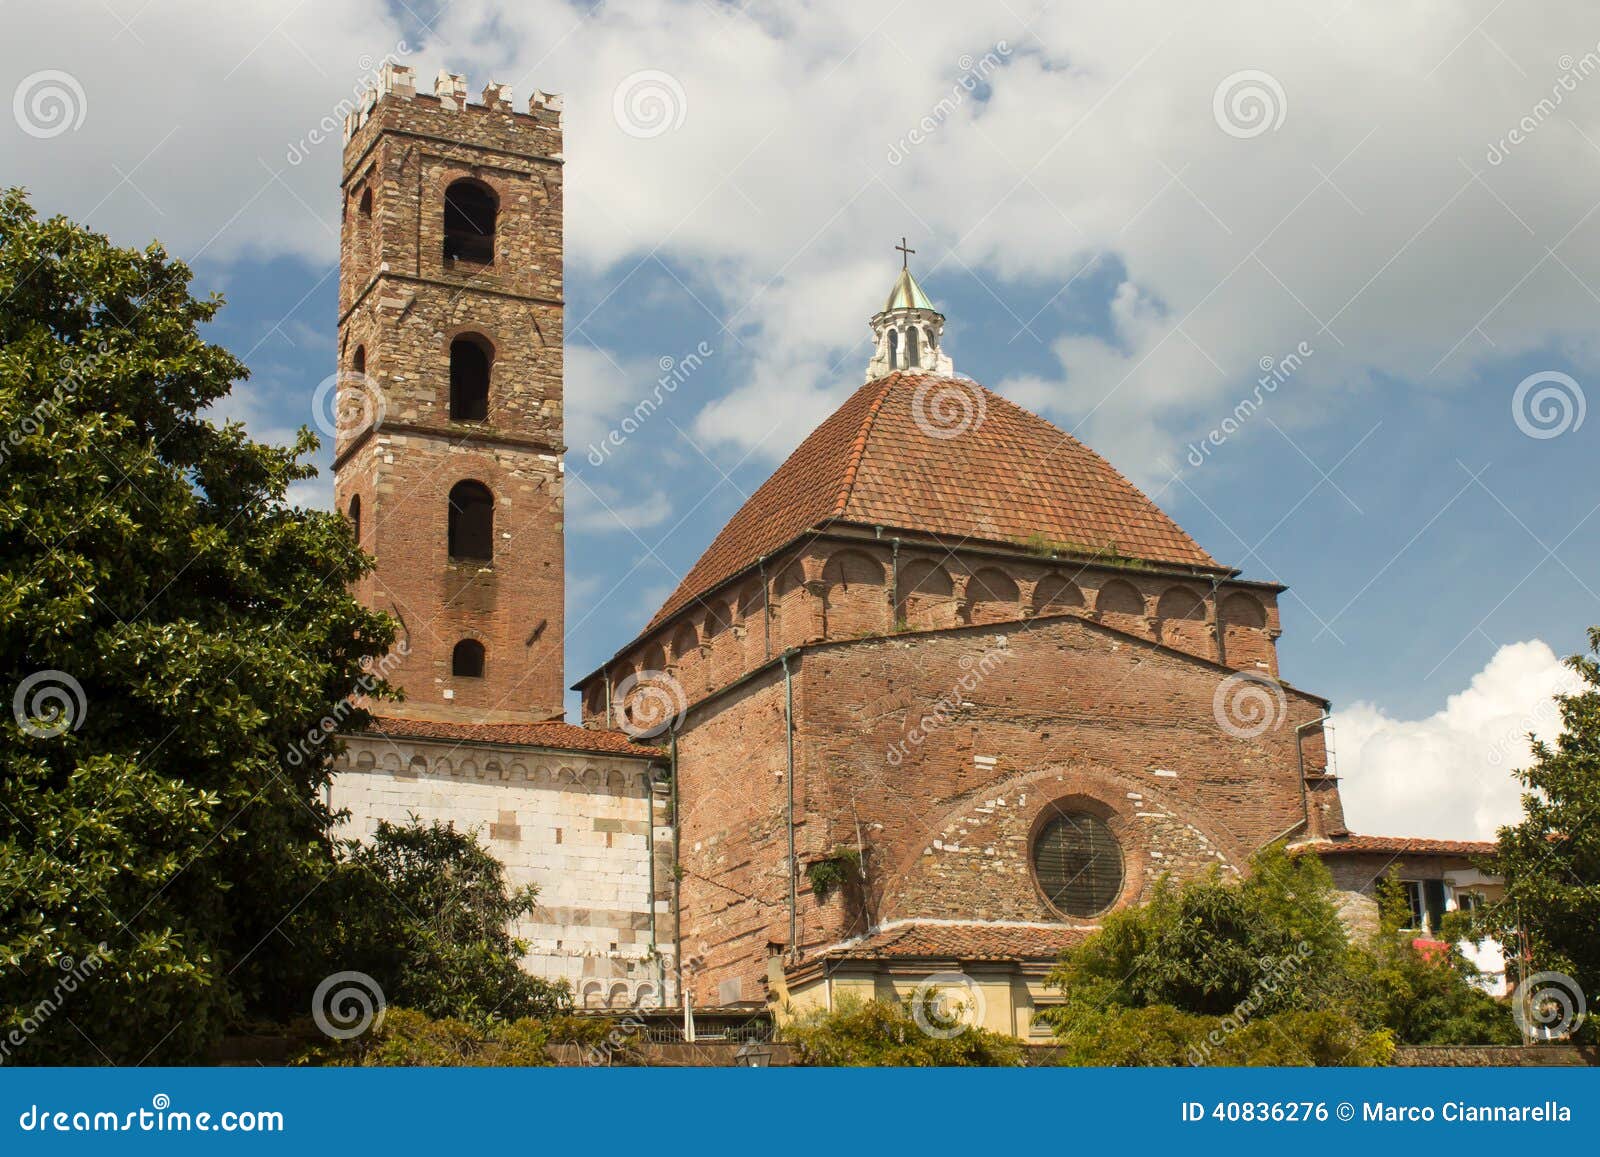 baptistery and church , lucca